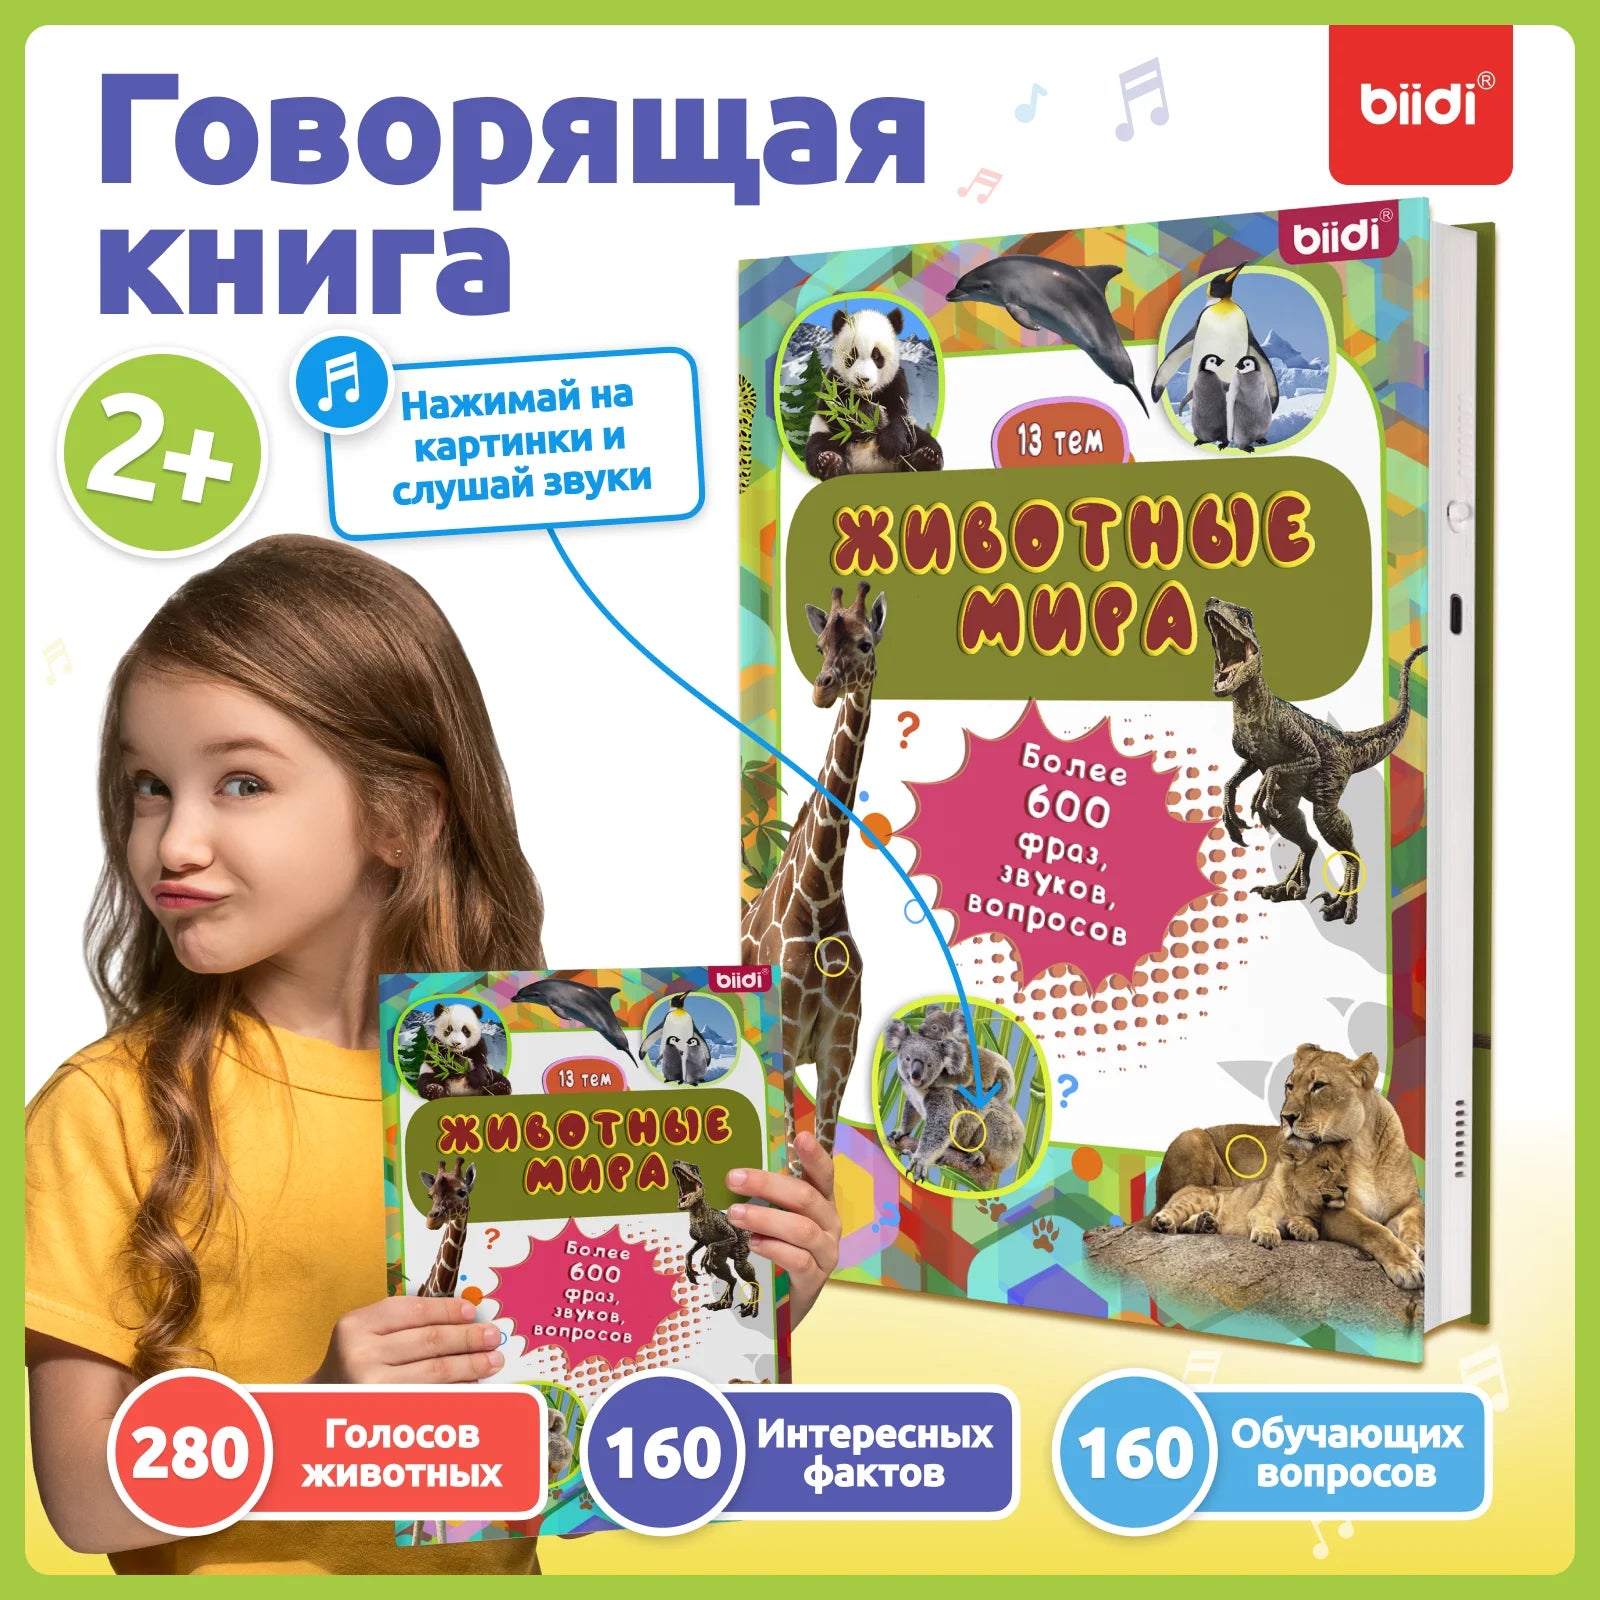 Biidi learning game for kids Montessori learning book for children intelligence educational Russian electronic book picture books